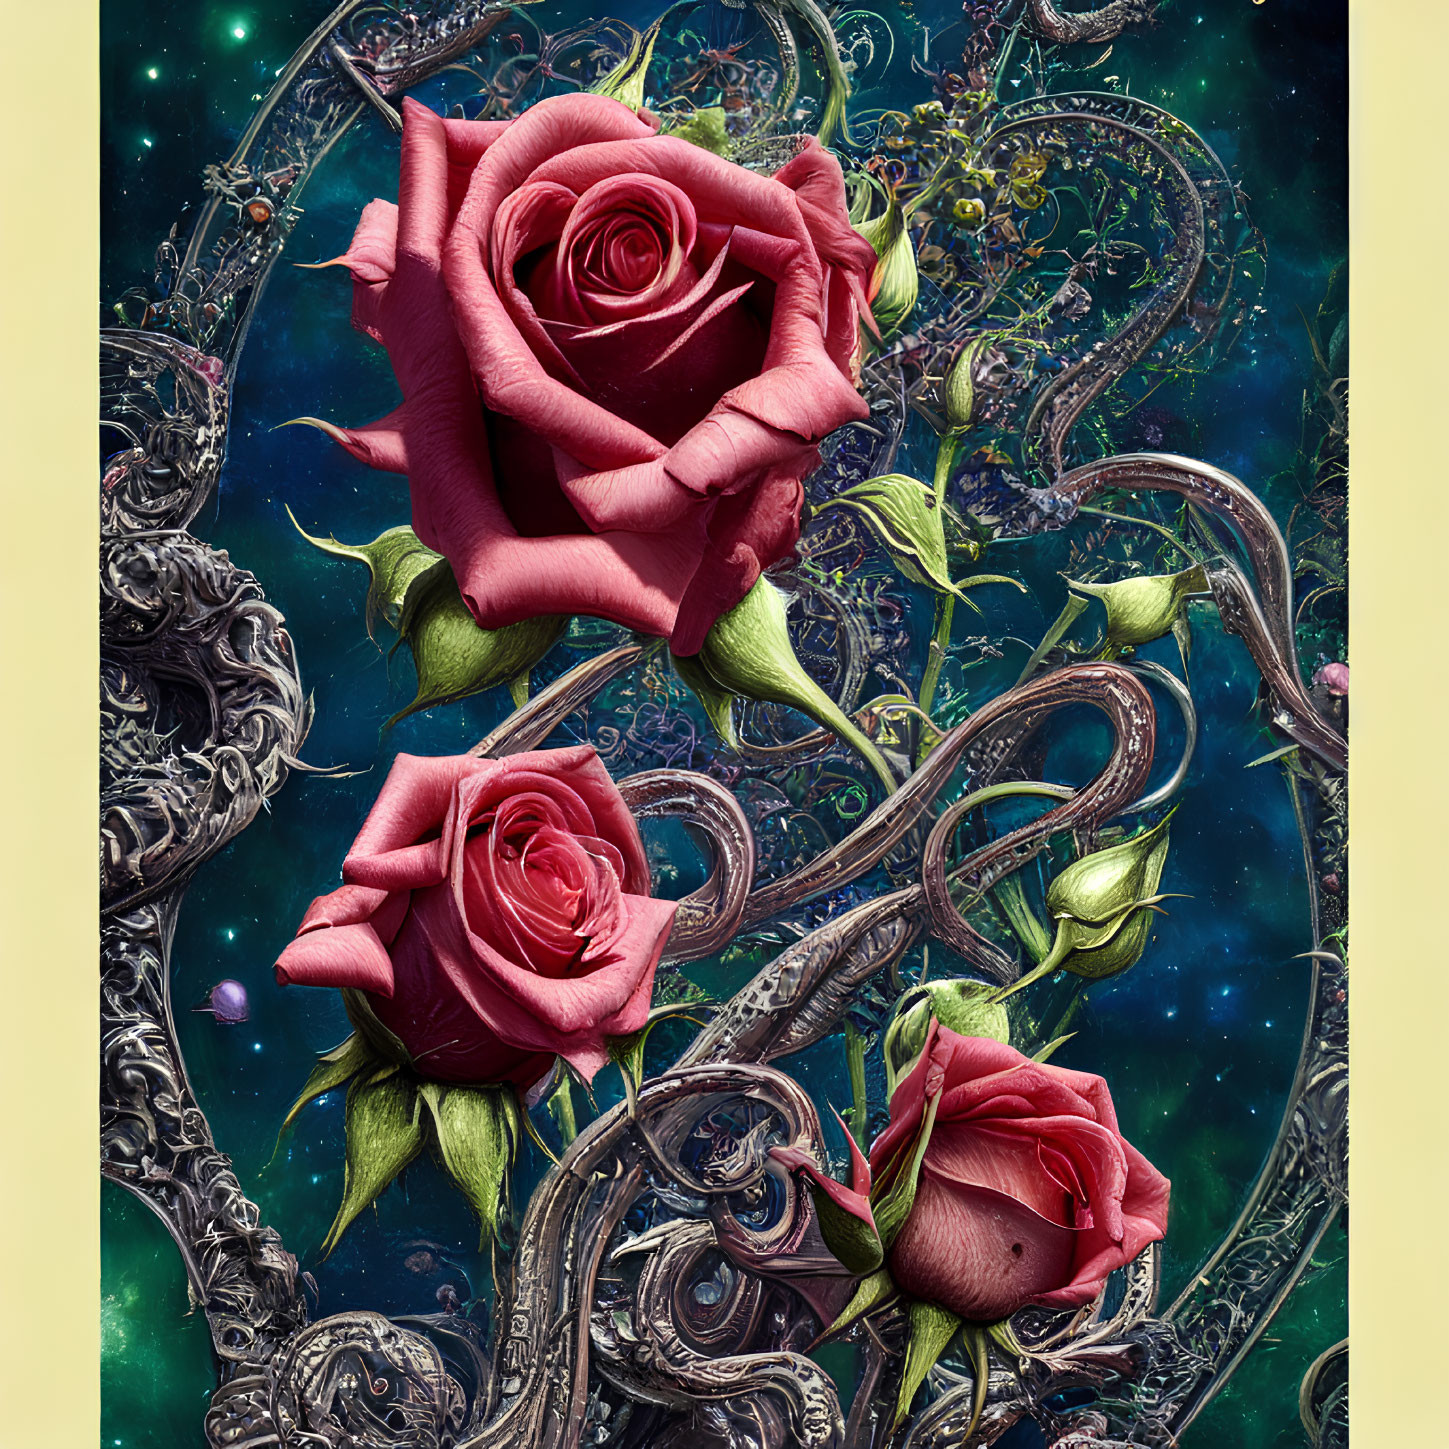 Digital artwork: Three red roses with metallic scrollwork on cosmic background